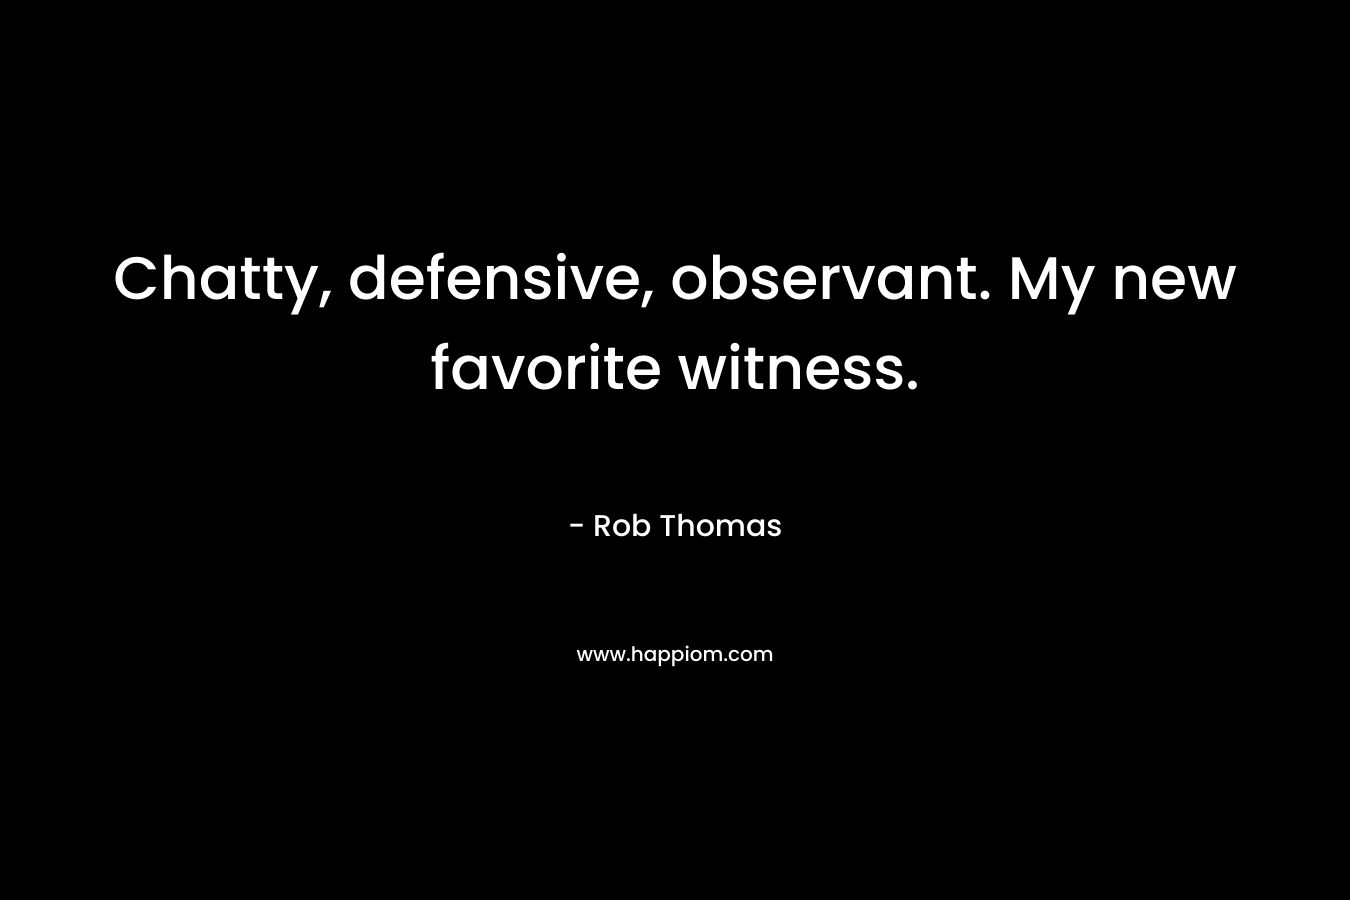 Chatty, defensive, observant. My new favorite witness. – Rob Thomas